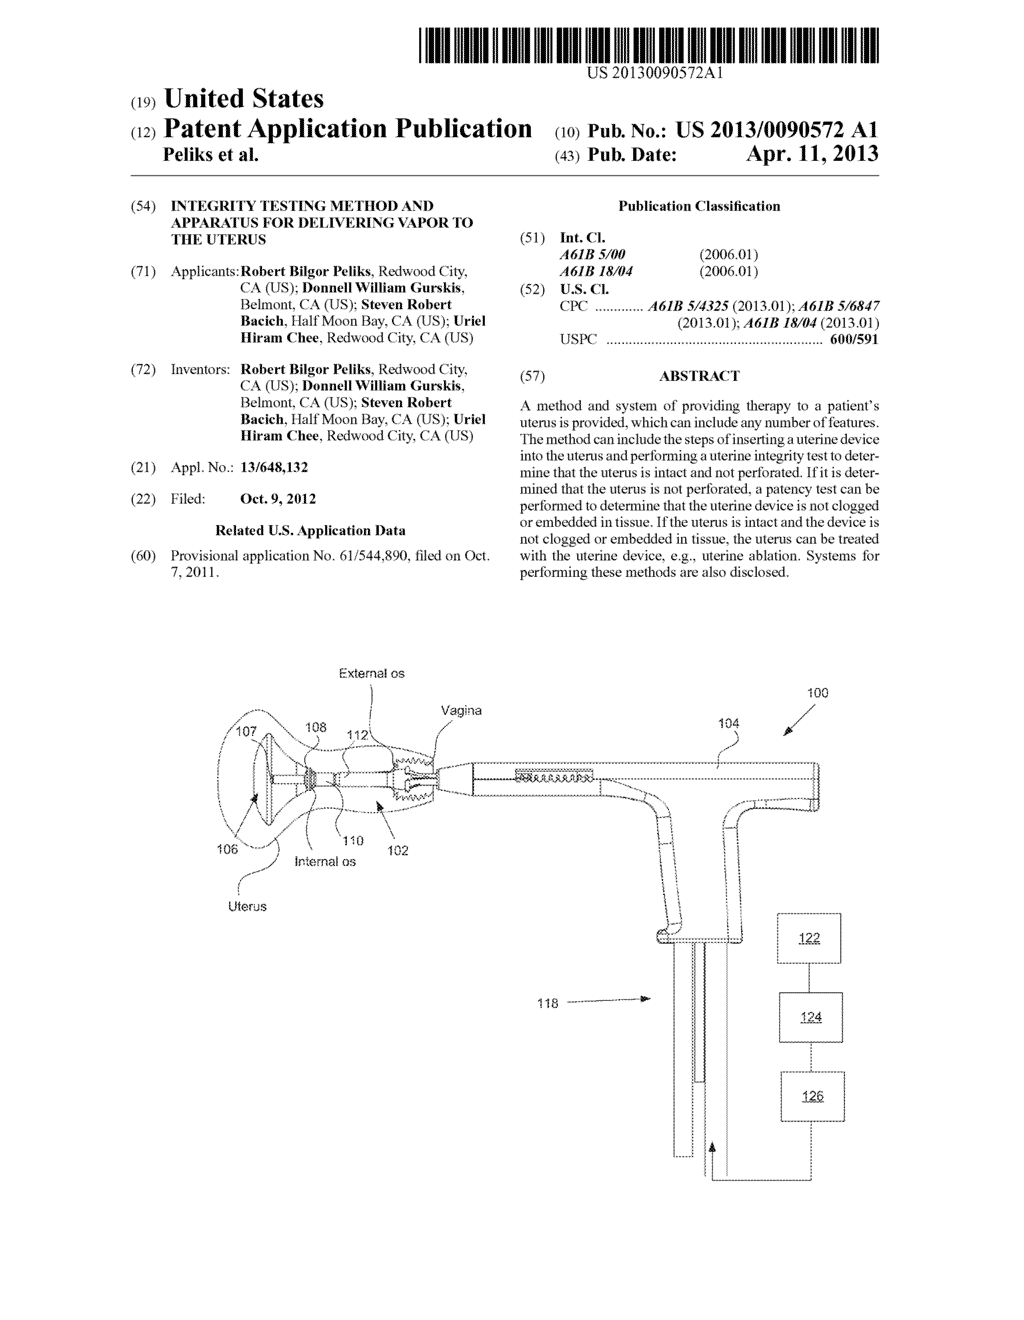 Integrity Testing Method and Apparatus for Delivering Vapor to the Uterus - diagram, schematic, and image 01